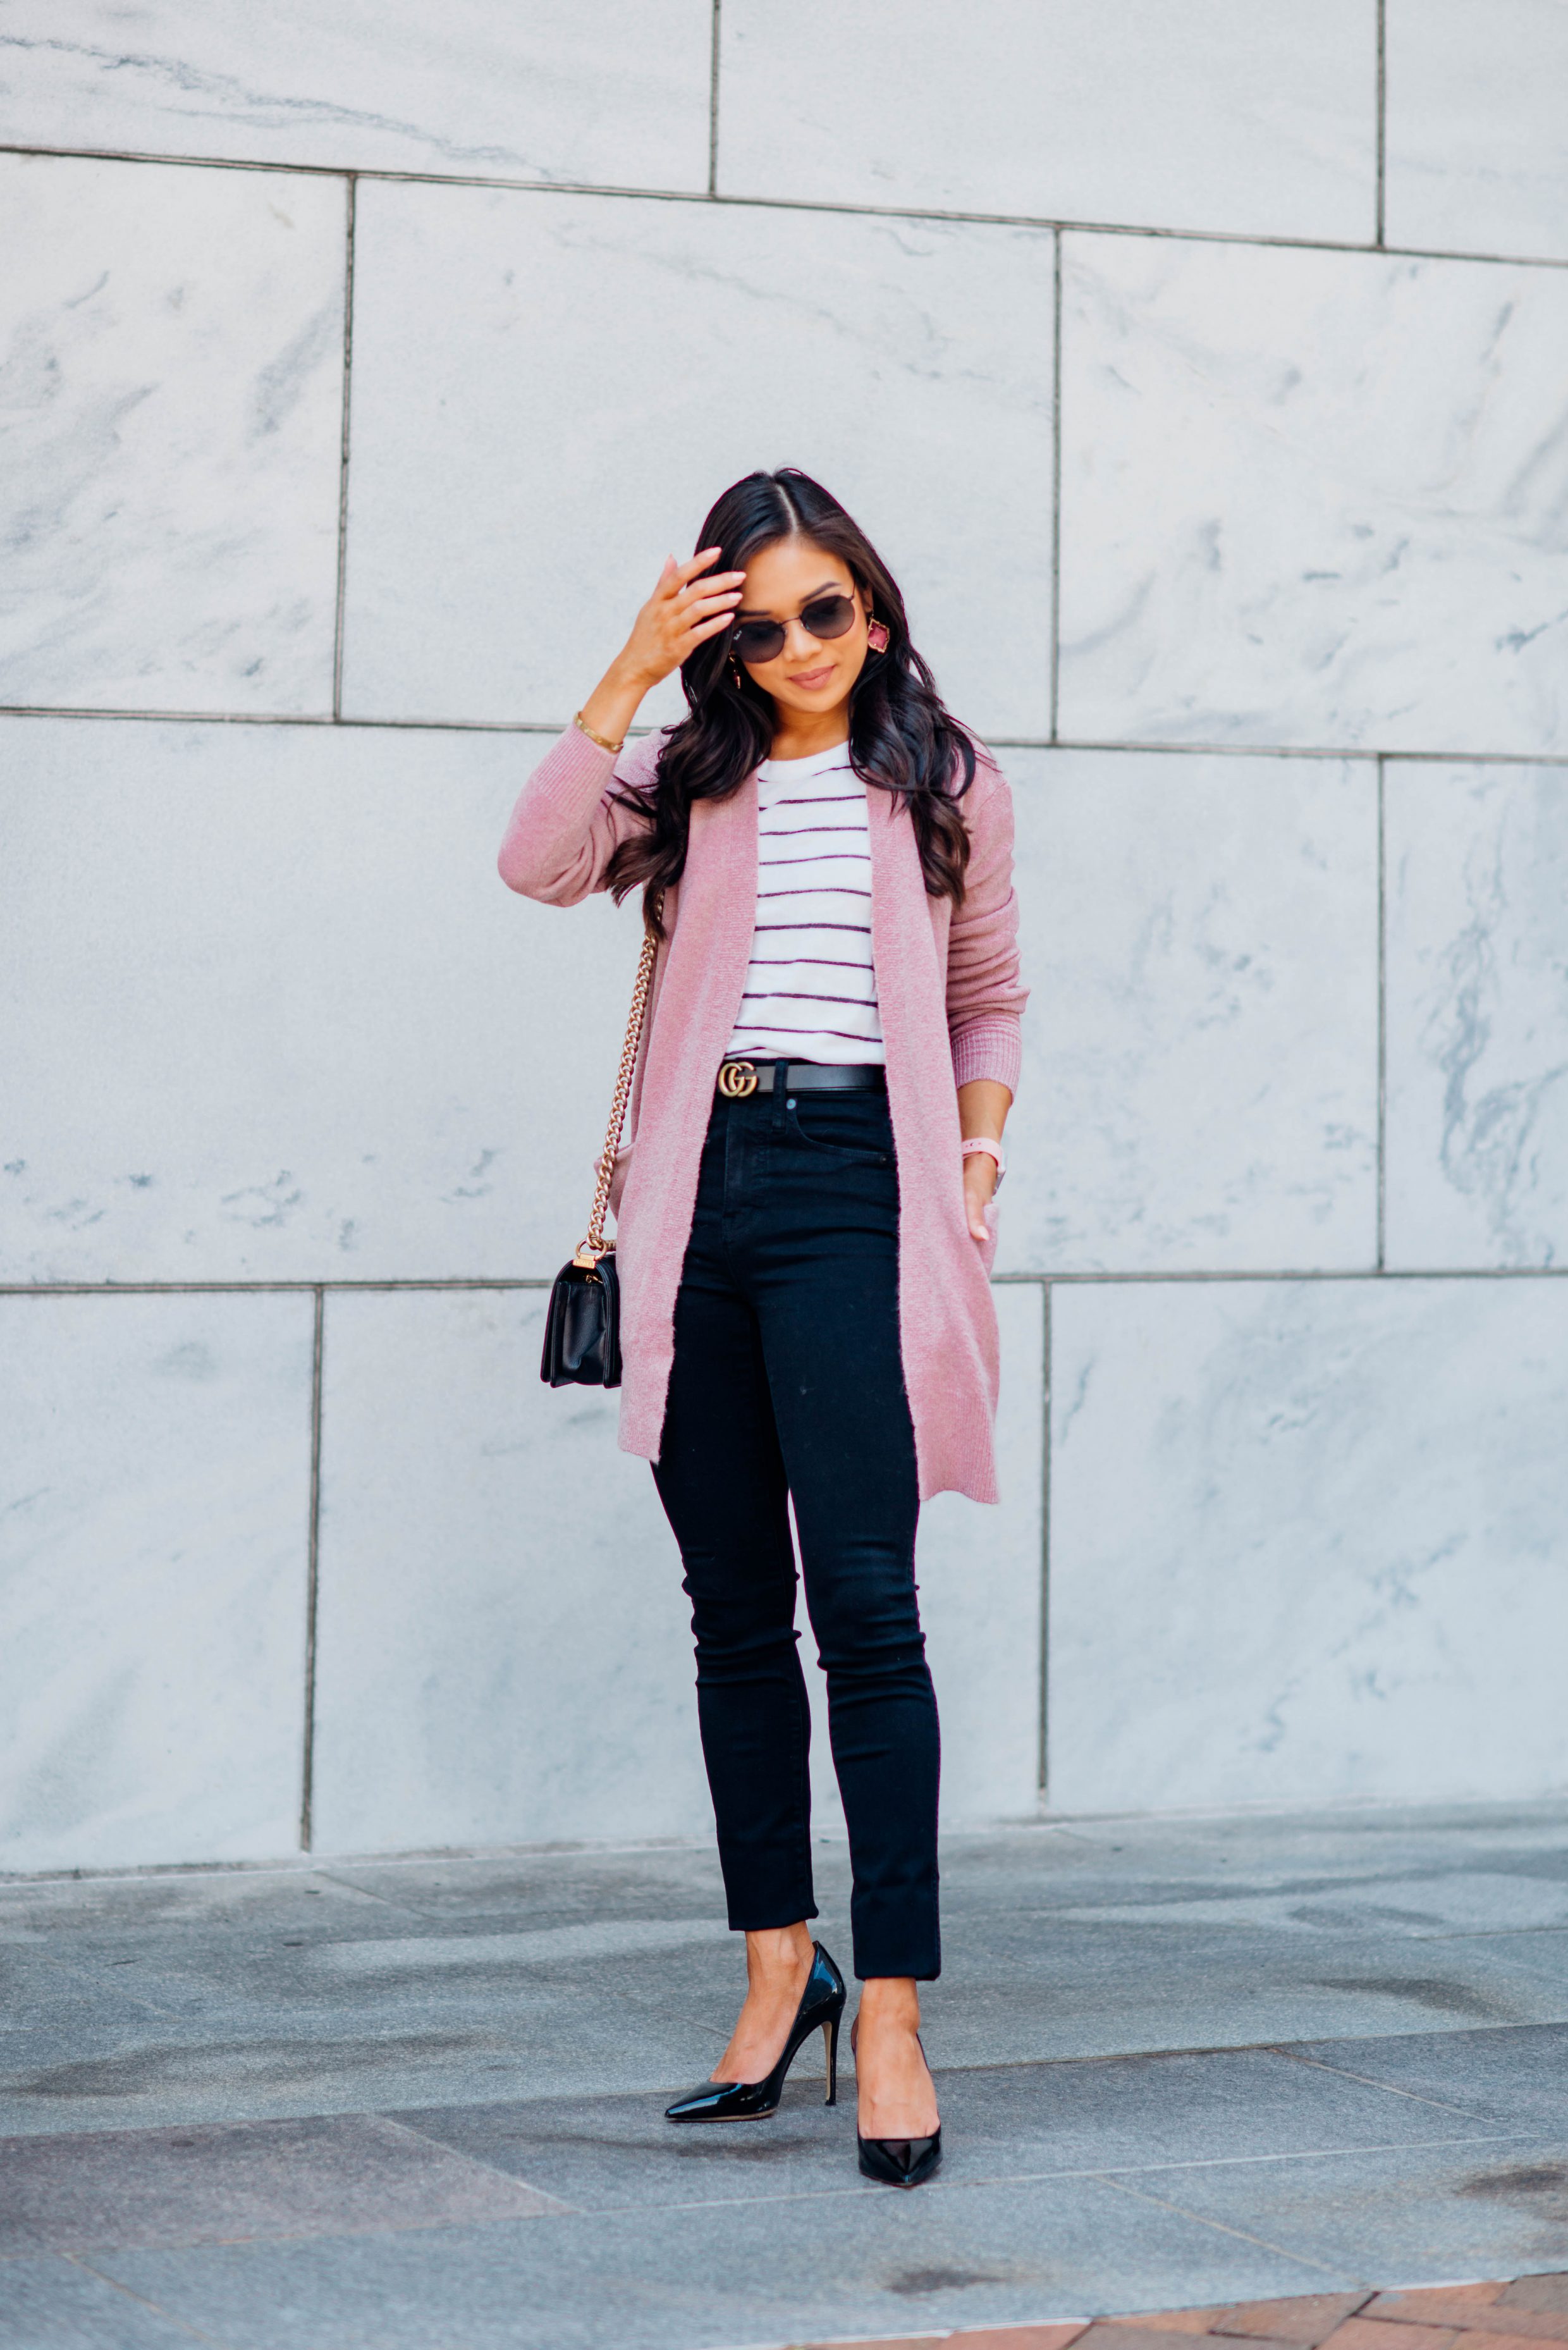 Easy fall look with a striped tee, blush cardigan and black jeans